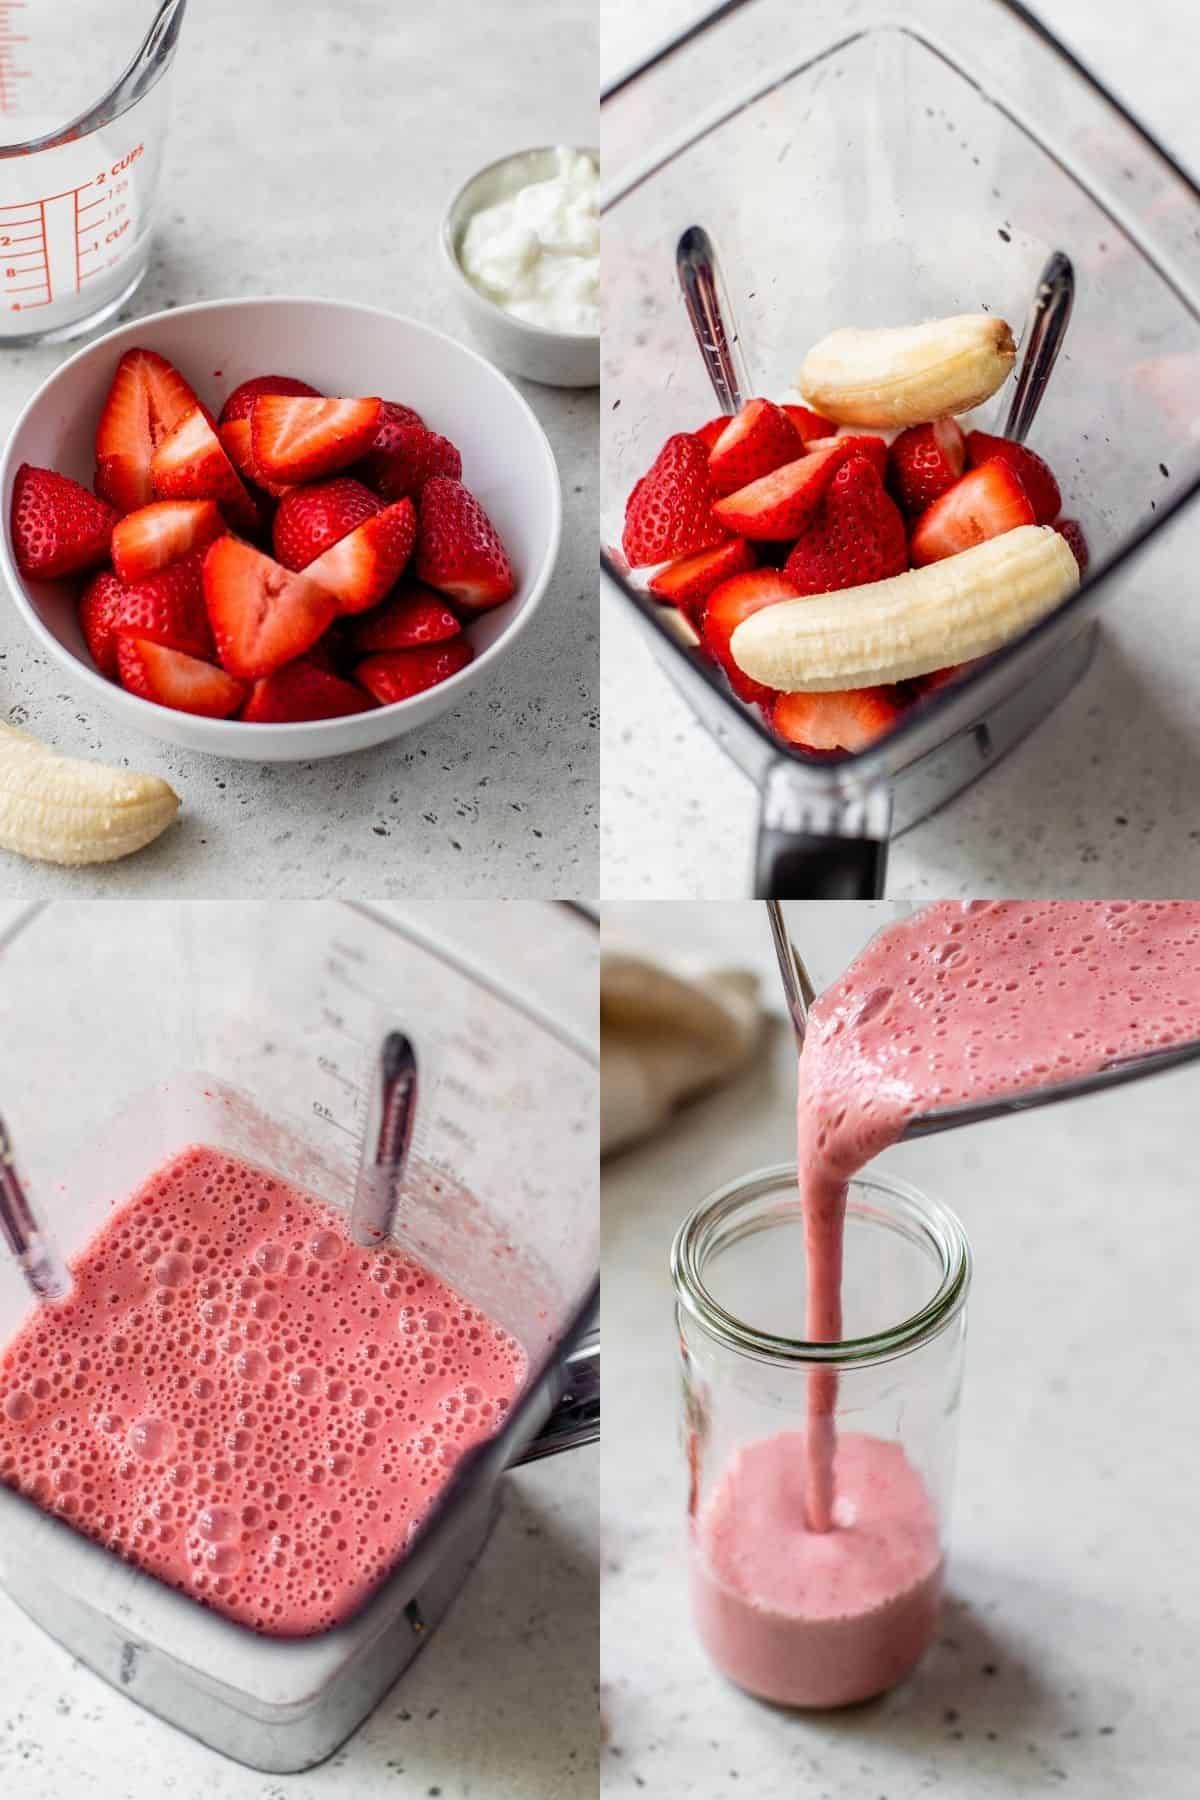 making a smoothie with strawberries and bananas